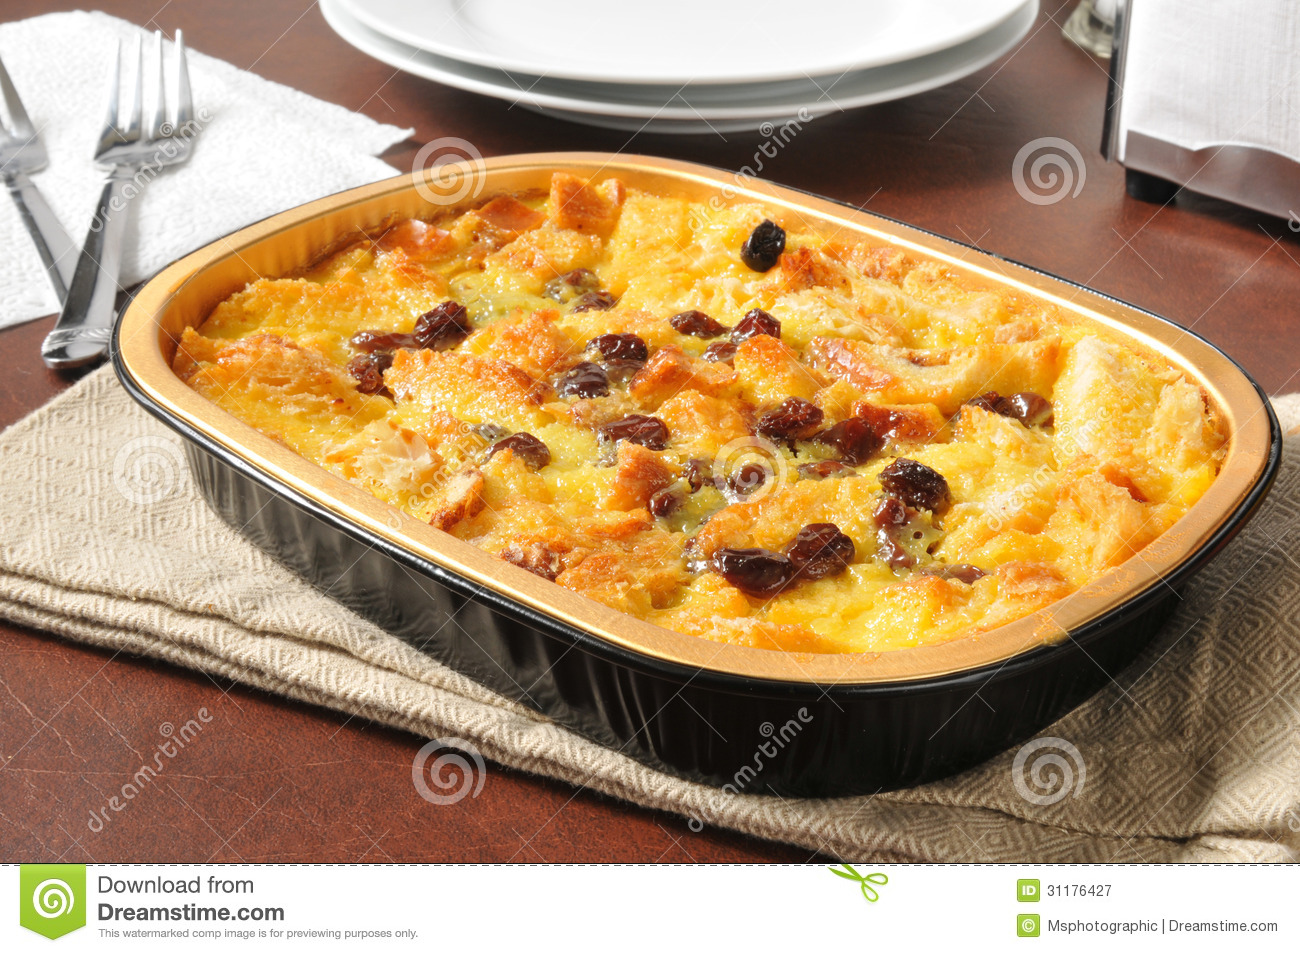 Bread Pudding Royalty Free Stock Photography   Image  31176427